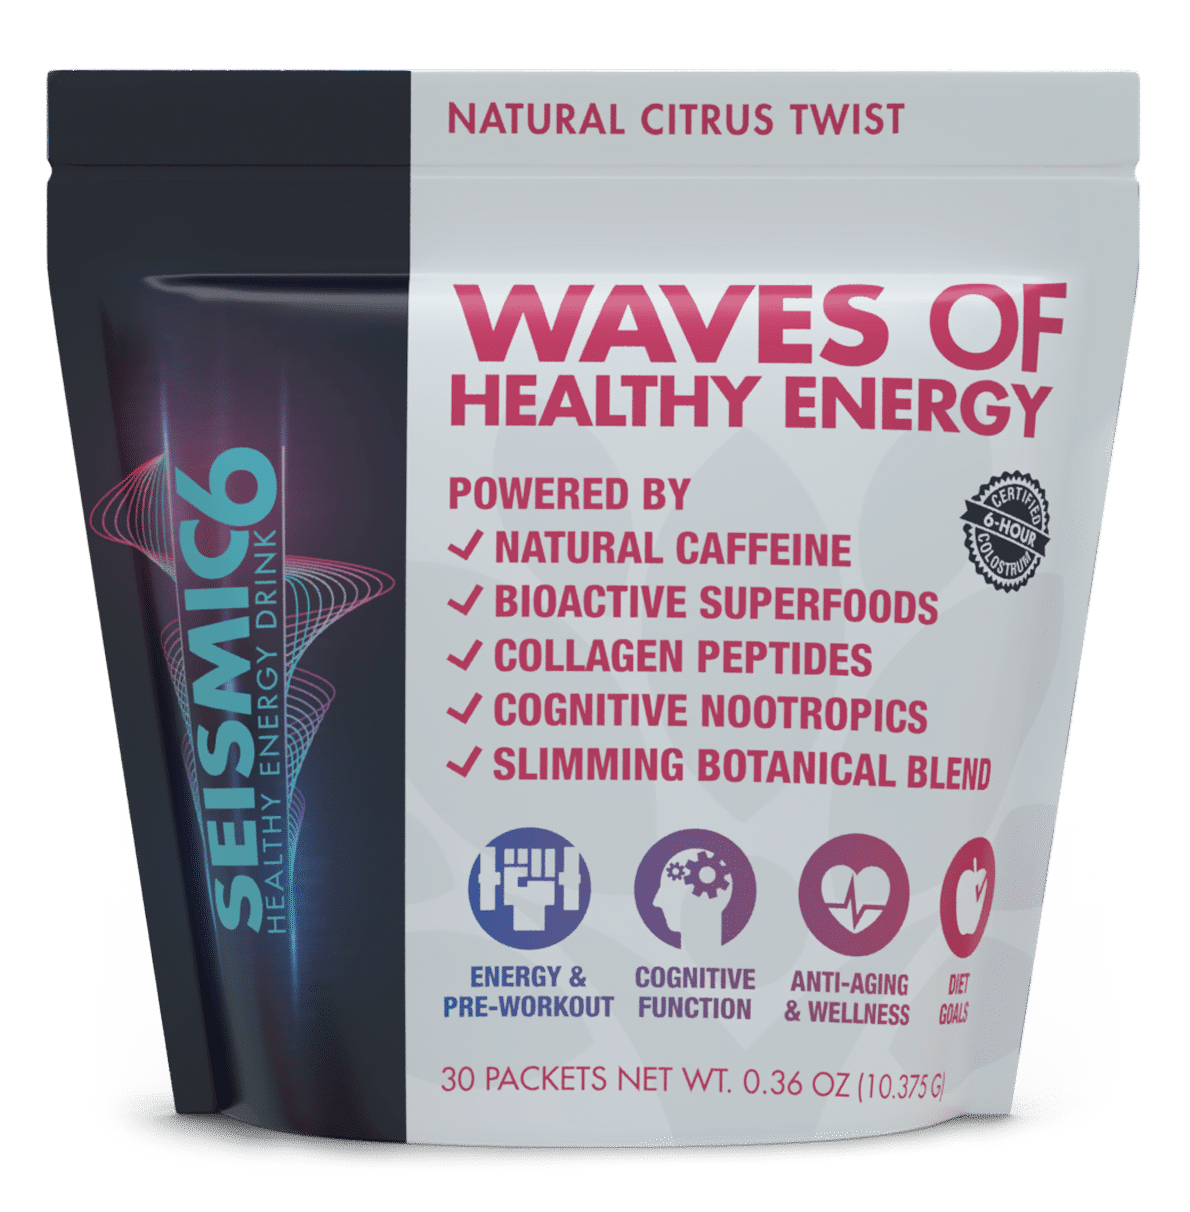 eismic6 is designed to support healthy immunity while providing a mega-wave of energy and anti-aging. It contains a unique blend of superfoods, collagen, fat burners, cognitive nootropics, amino acid, protein, and a slimming botanical blend.